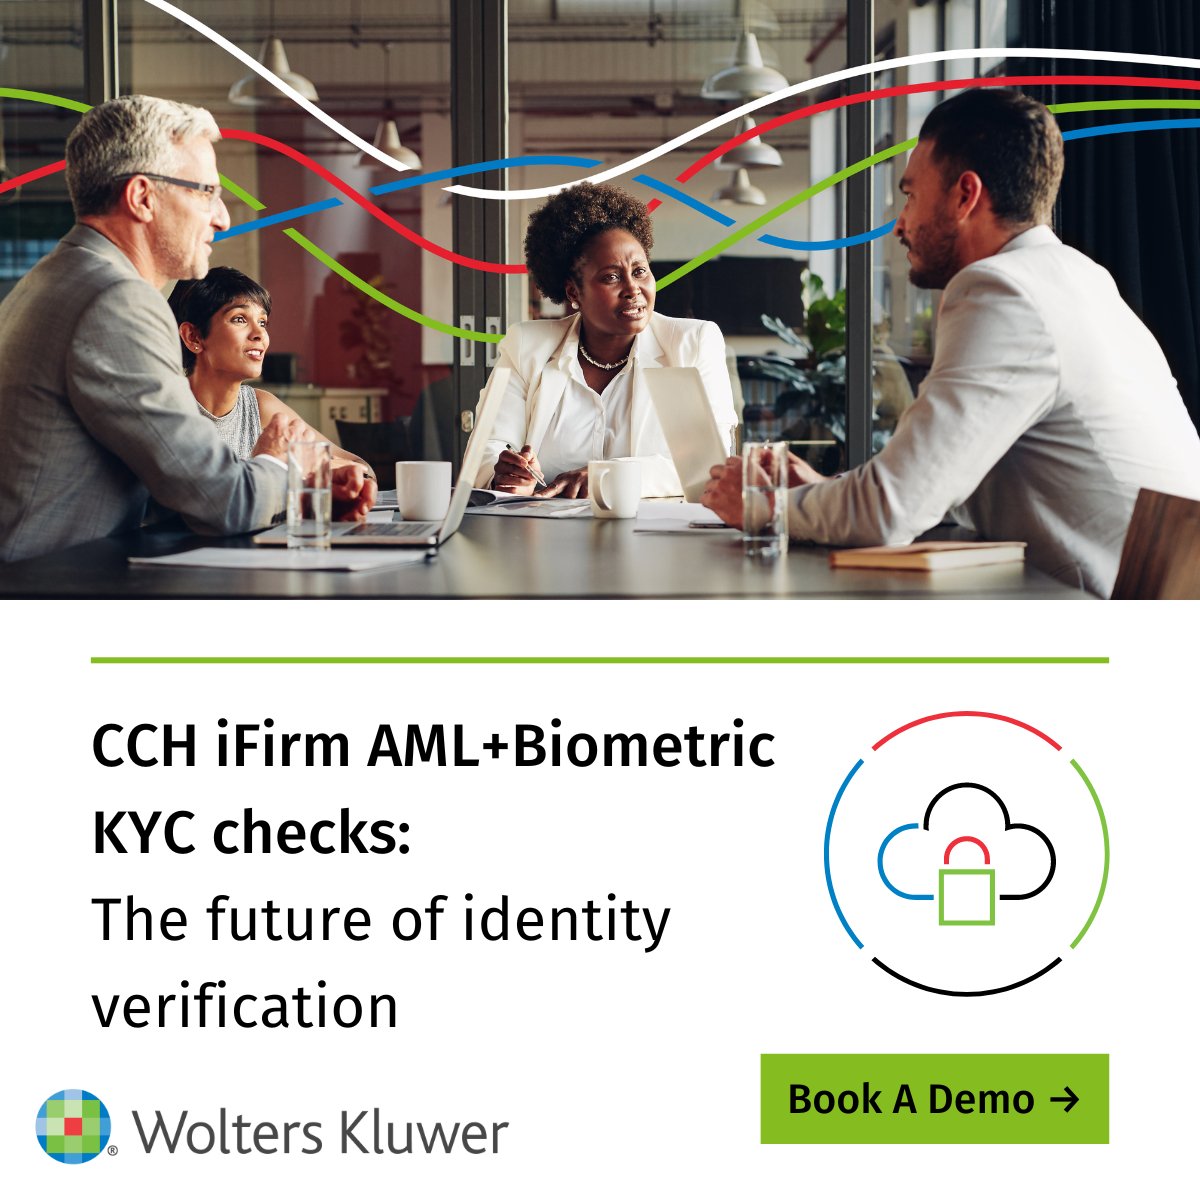 Looking for an end-to-end solution for KYC and AML checks? Our award-winning CCH iFirm + Biometric KYC checks does just that, exclusively for CCH Central users. Learn more: bit.ly/48IHL8Q #WoltersKluwer #WKUK #CCHiFirm #Biometrics #AntiMoneyLaundering